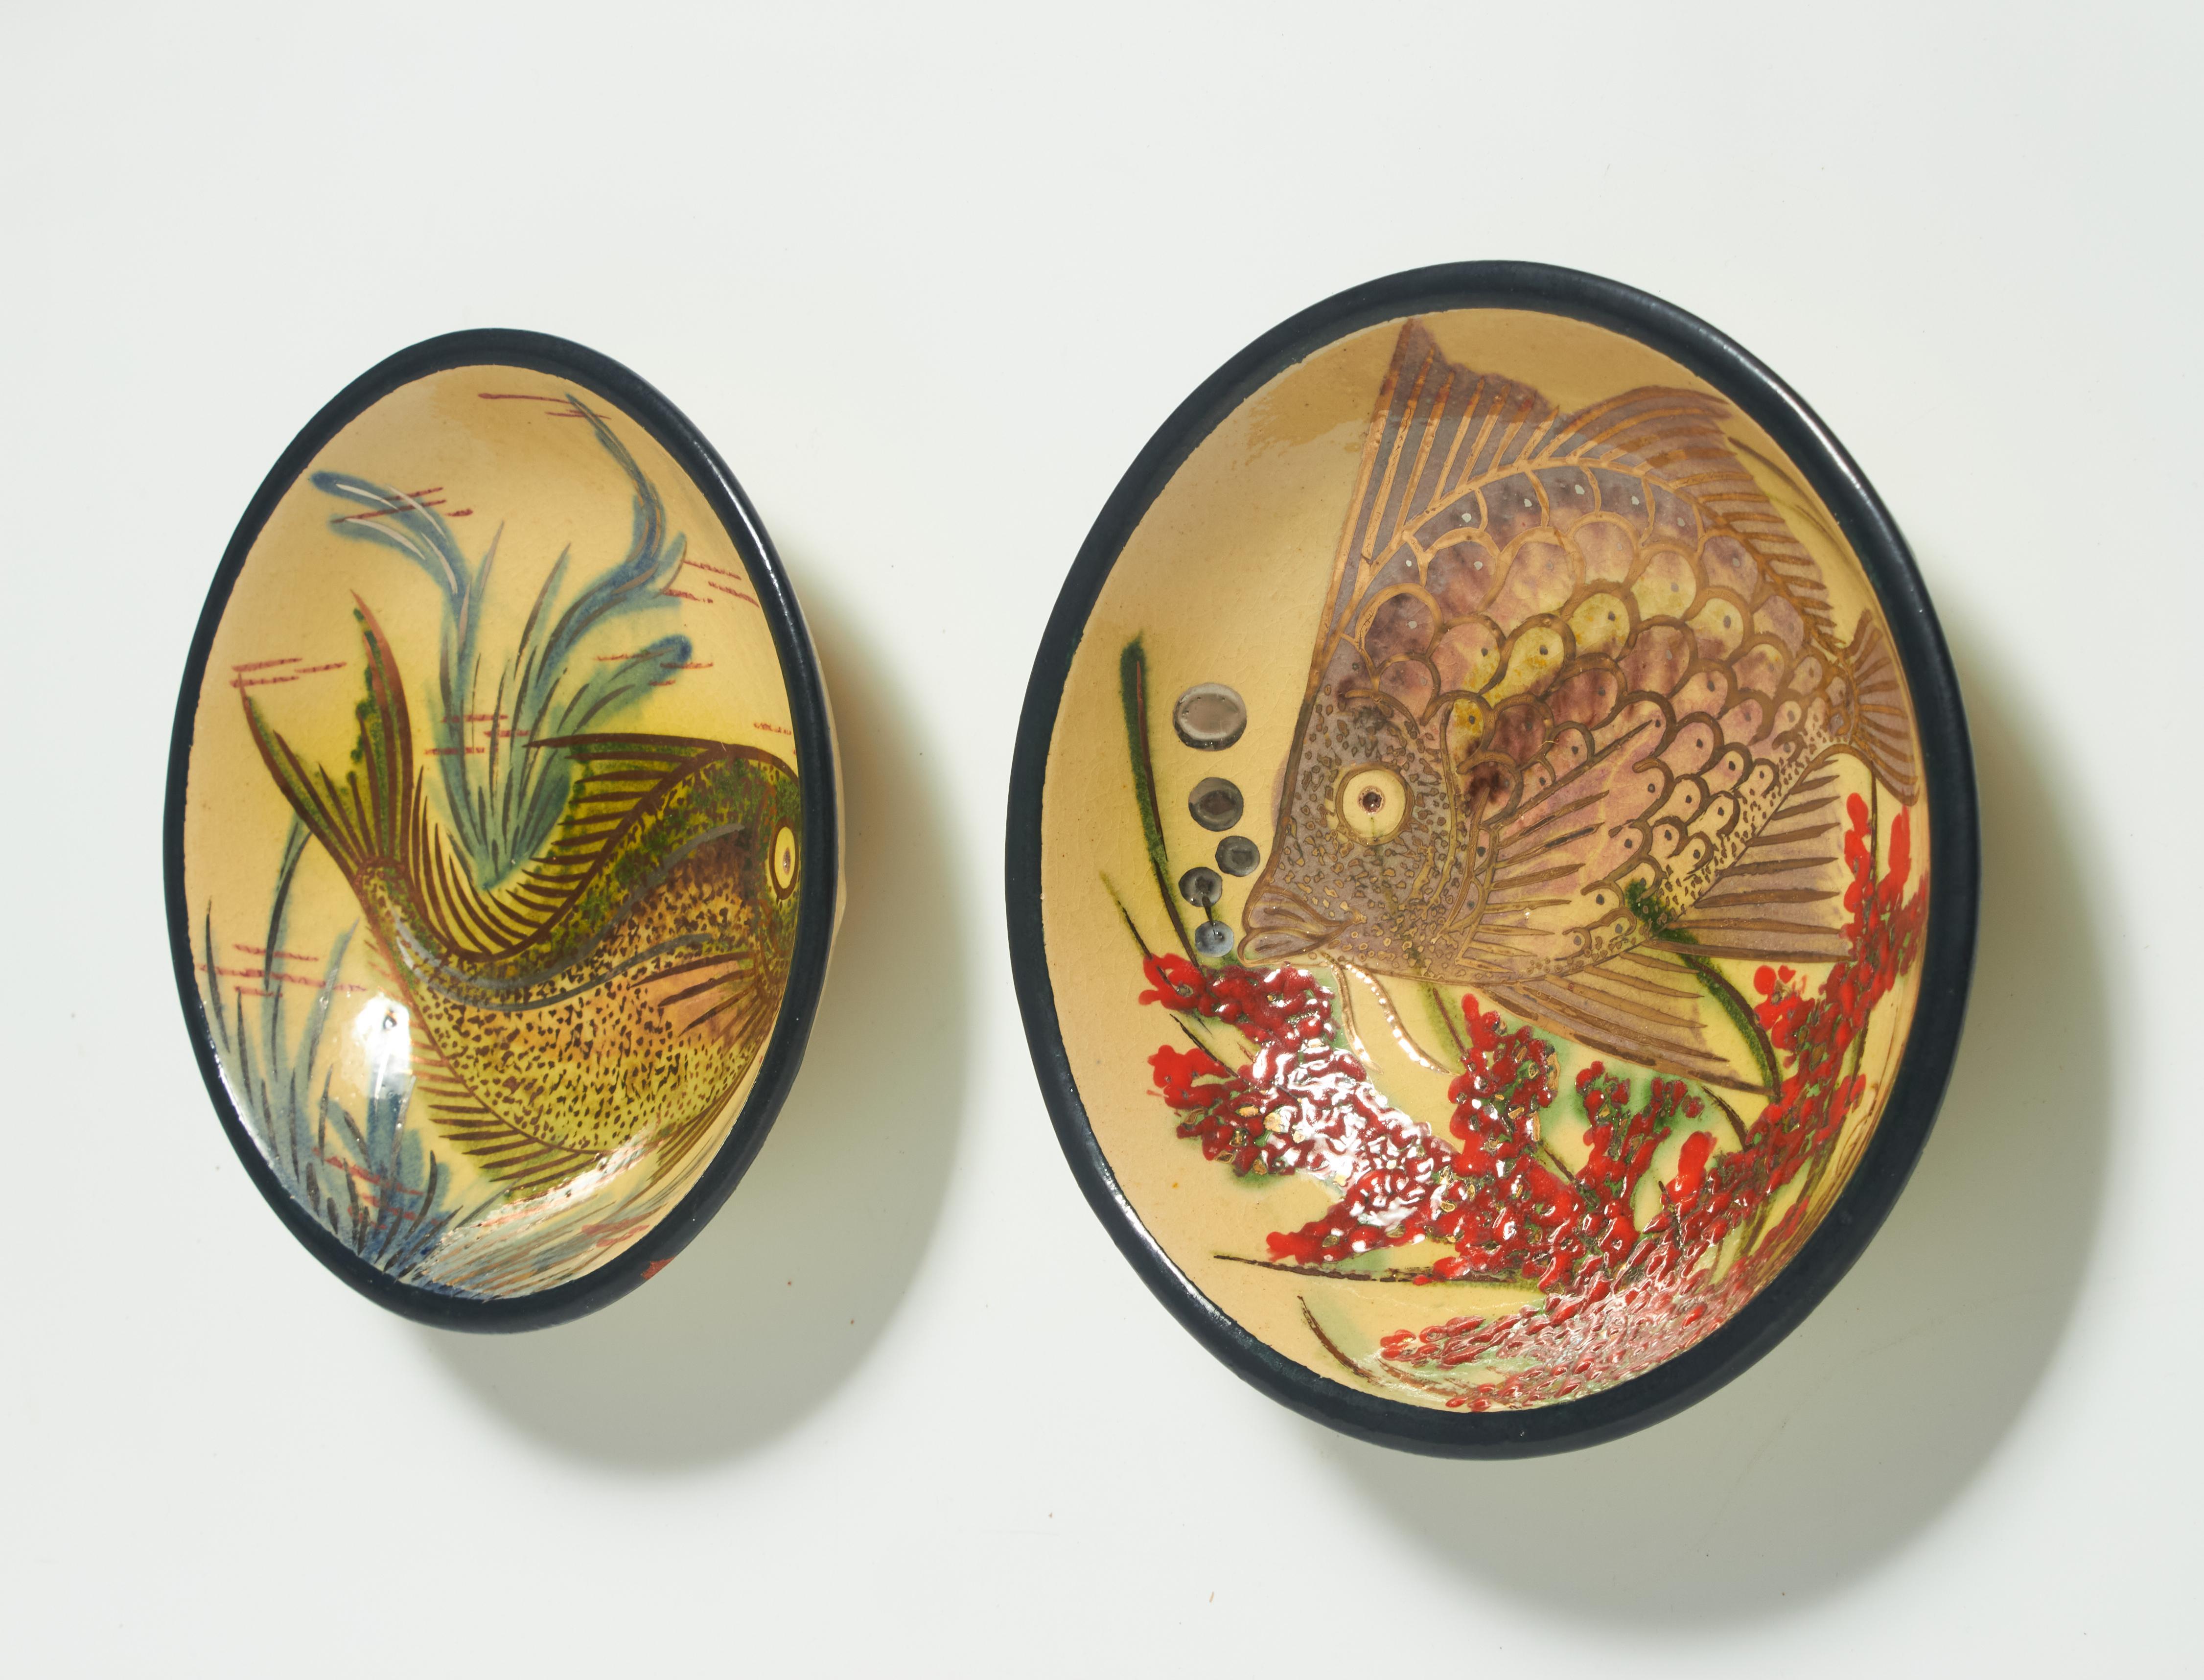 Spanish Pair of Vintage Hand-Painted Ceramic Plates by Catalan Artist Diaz Costa For Sale